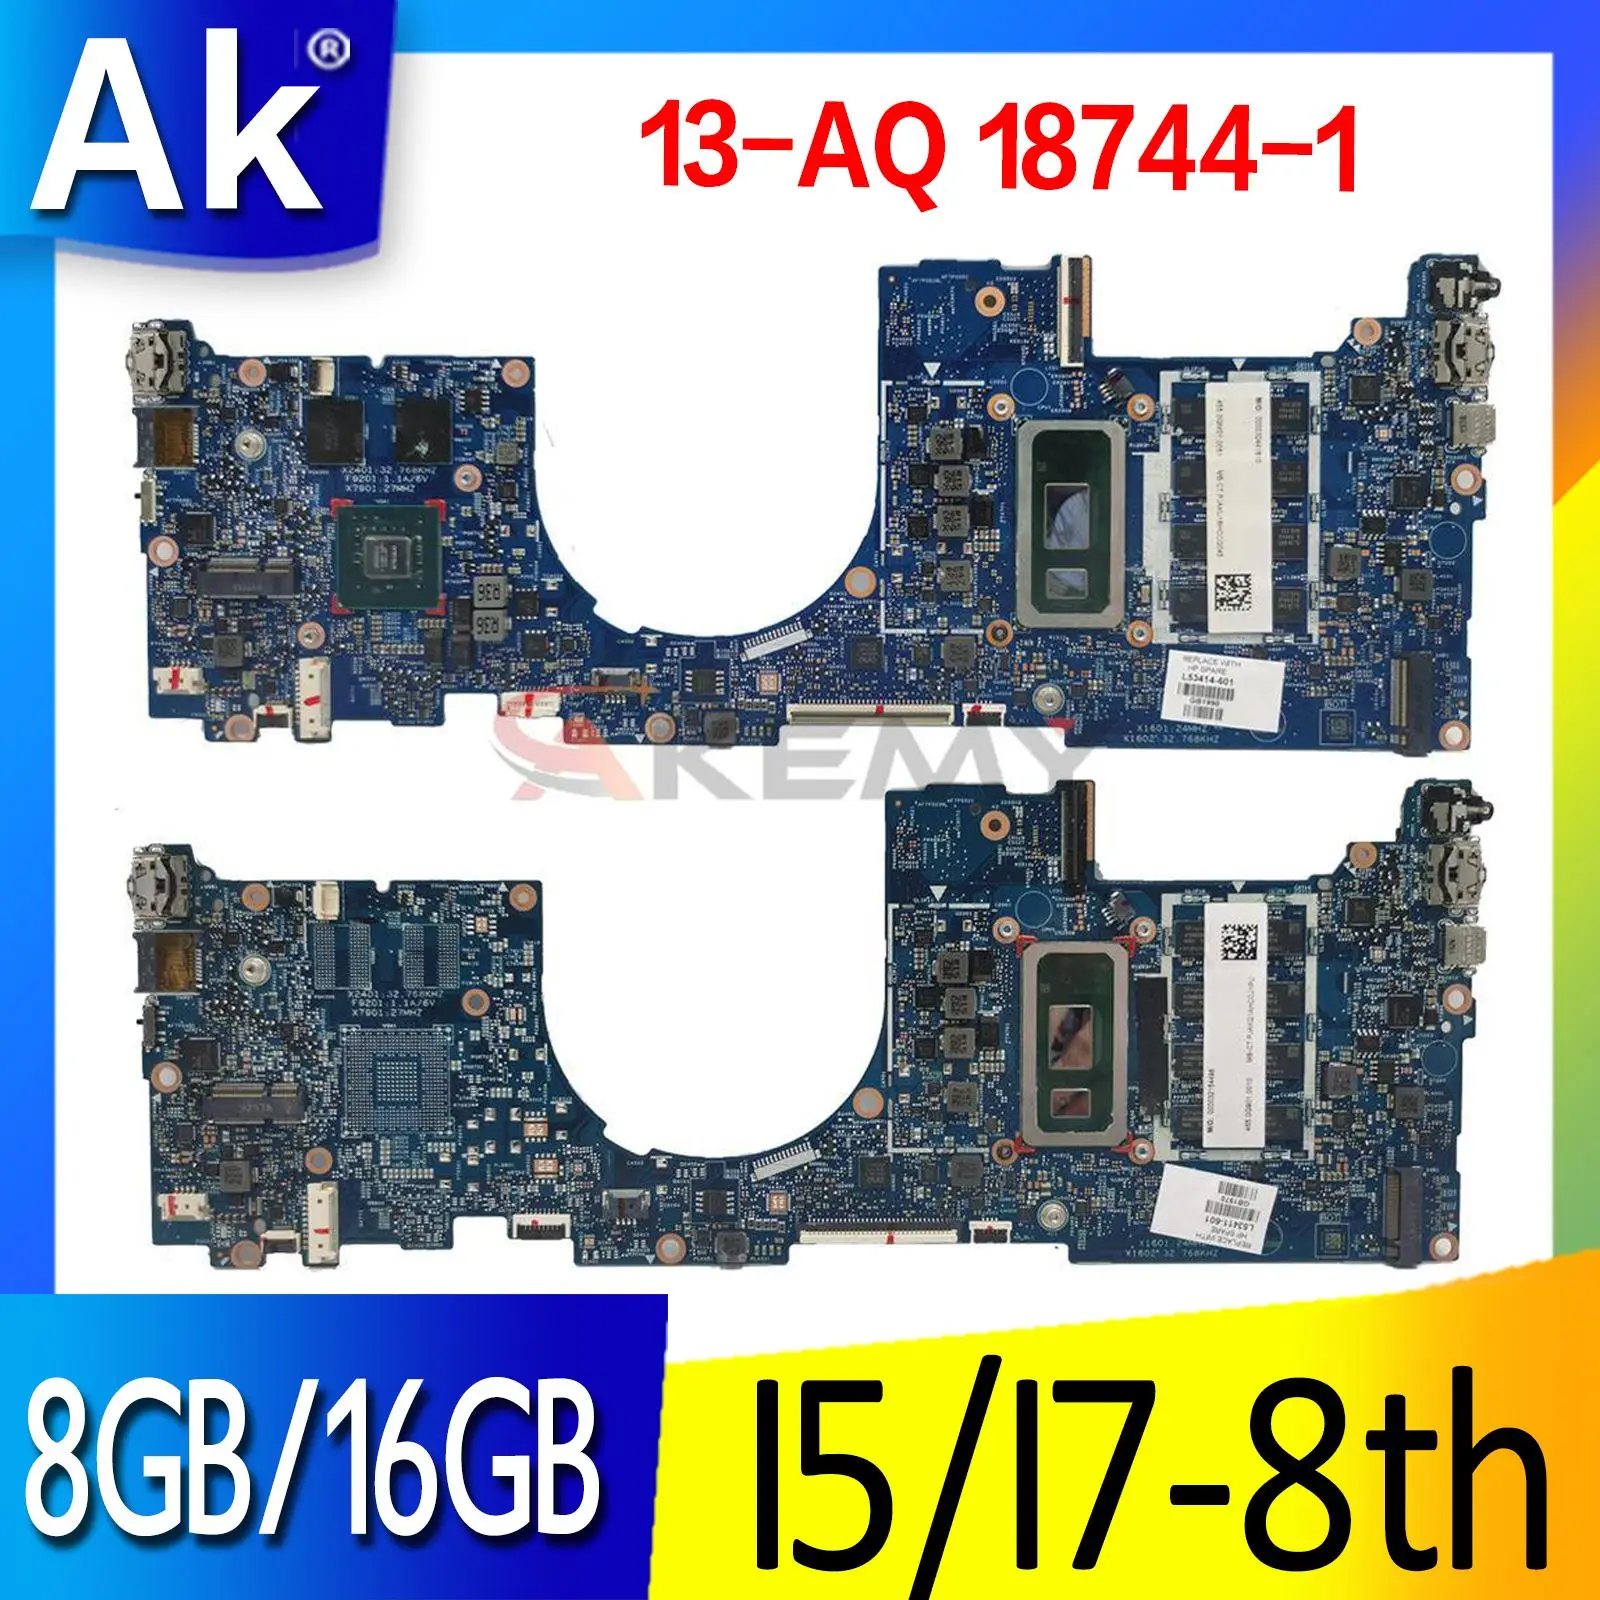 

For HP ENVY 13-AQ Laptop motherboard Mainboard with I5 I7 CPU 8GB 16GB RAM V2G GPU 18744-1 Motherboard